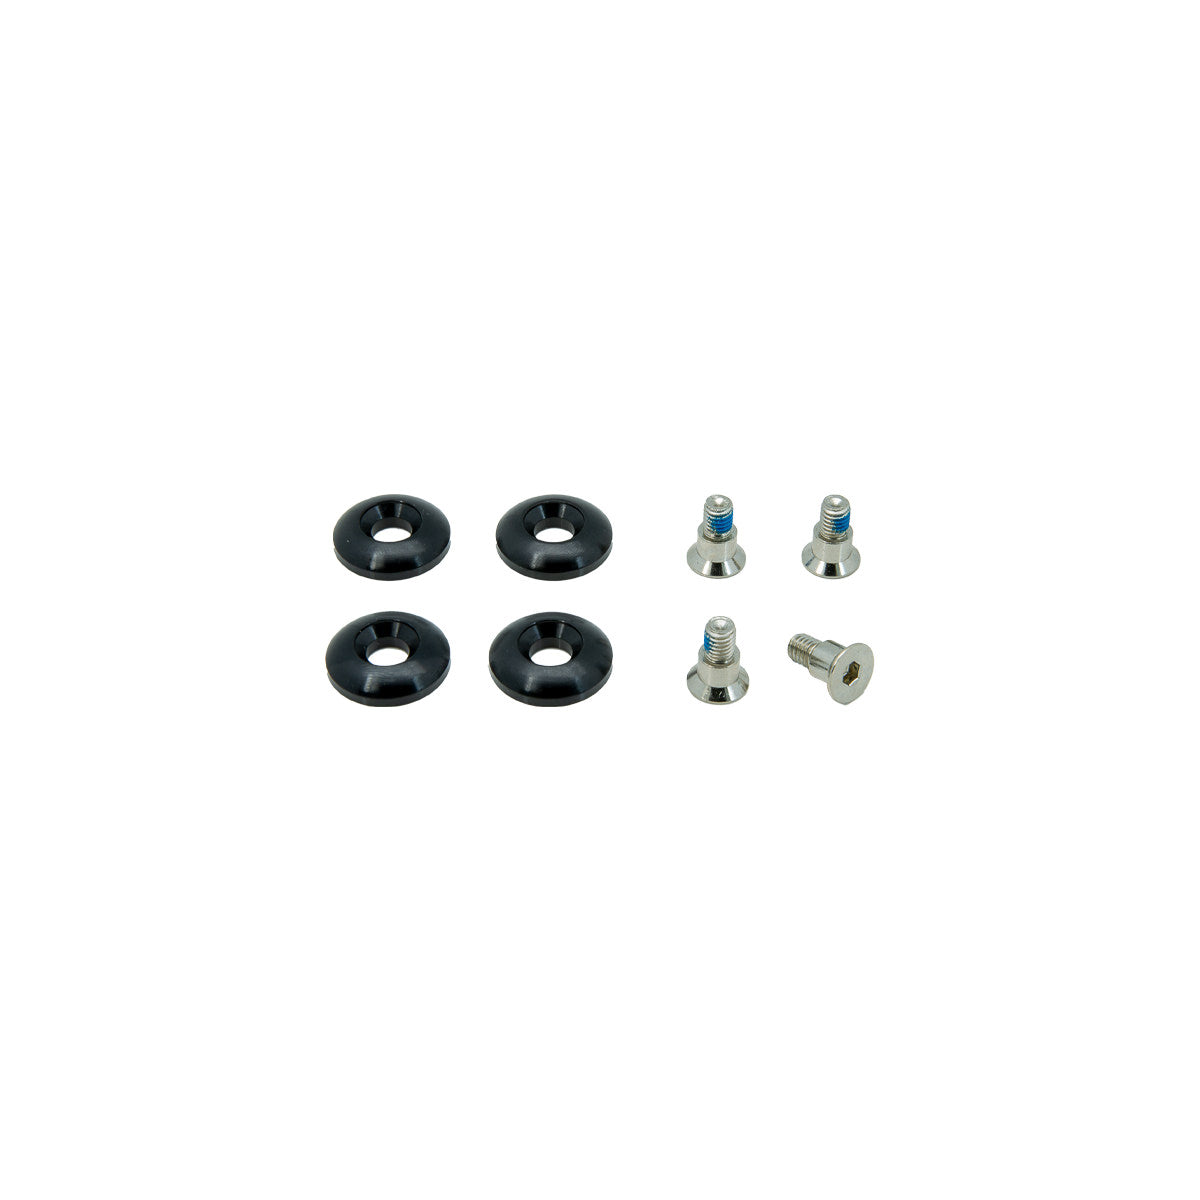 pack of 4 Screws and Washers for the SPIN Skates